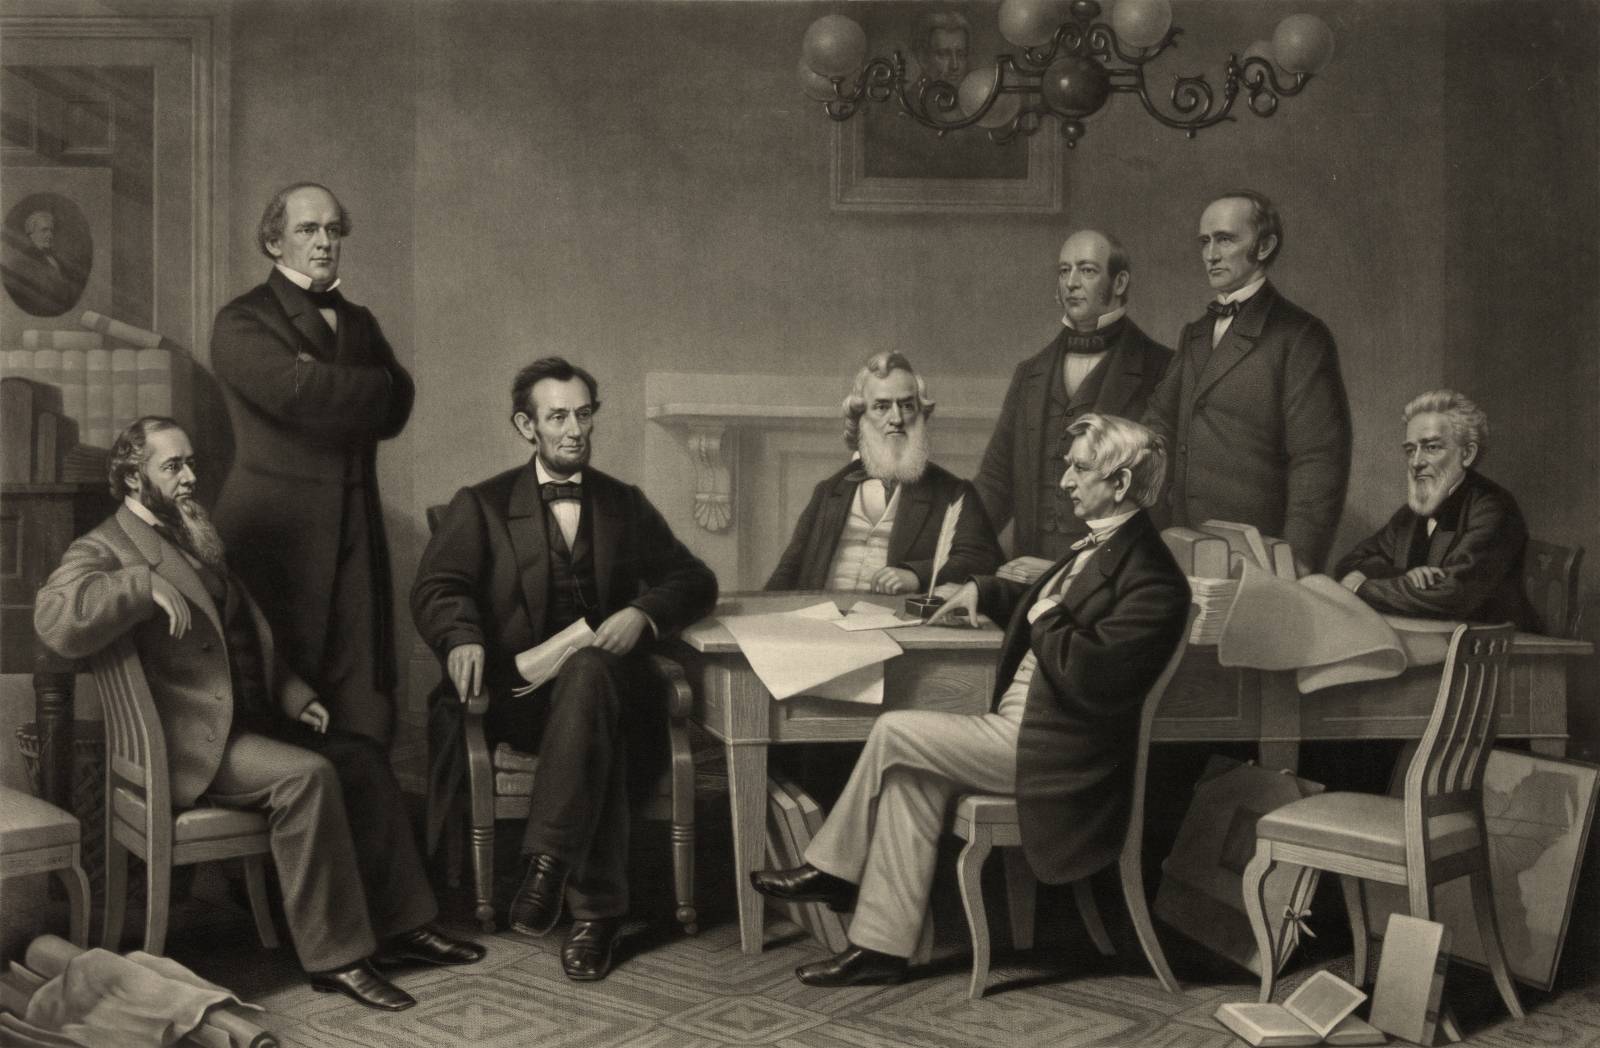 An illustration depicting the first reading of the Emancipation Proclamation before the cabinet of U.S. President Abraham Lincoln